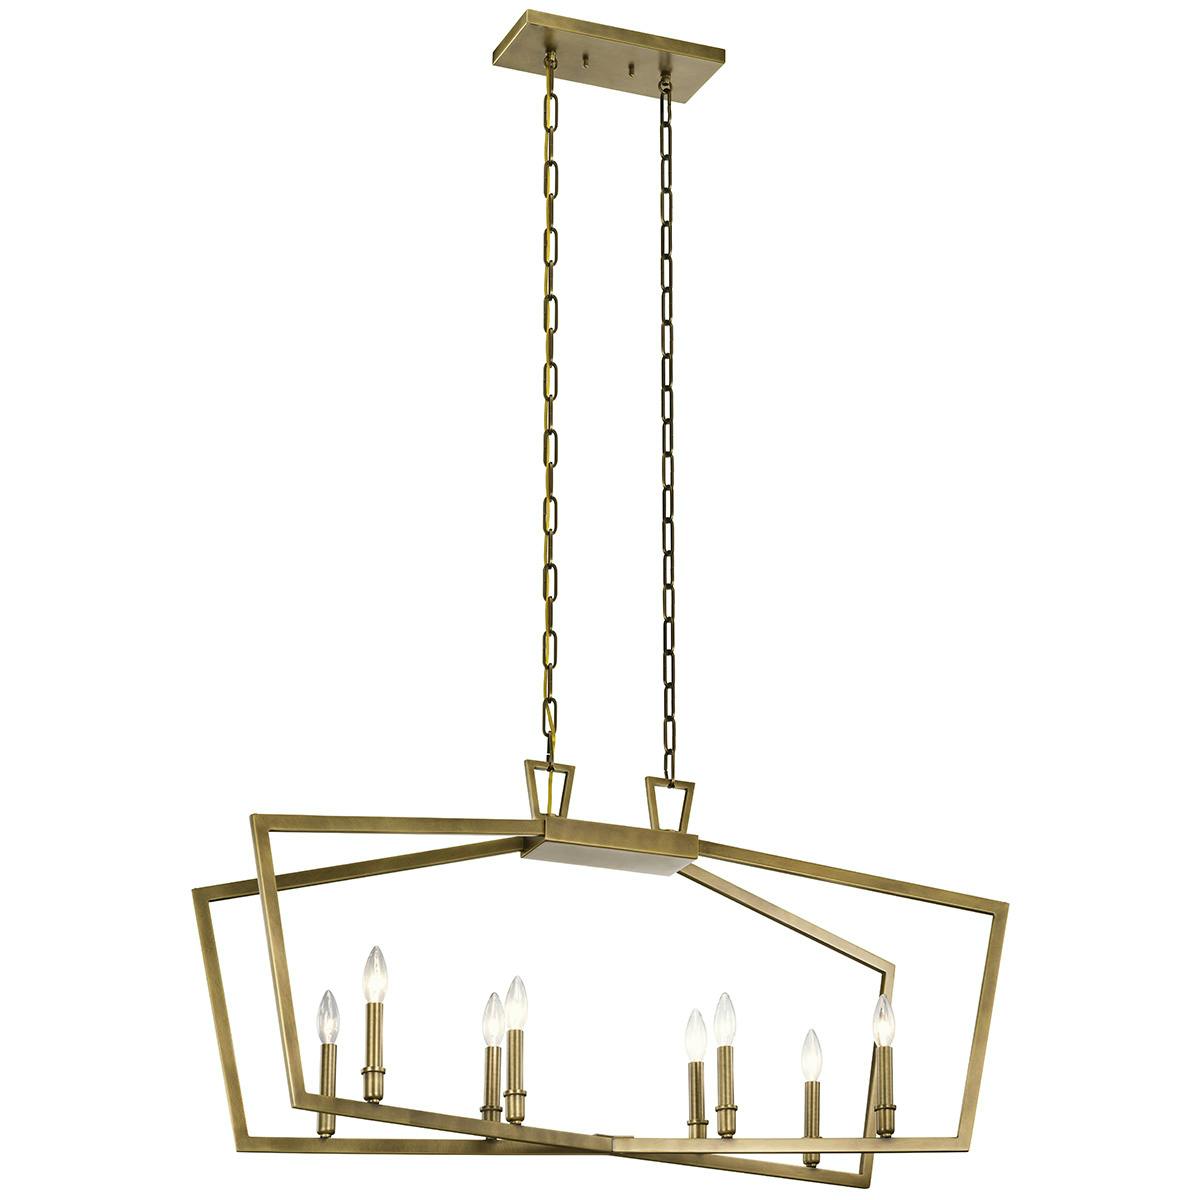 Abbotswell 42" Linear Chandelier Brass on a white background